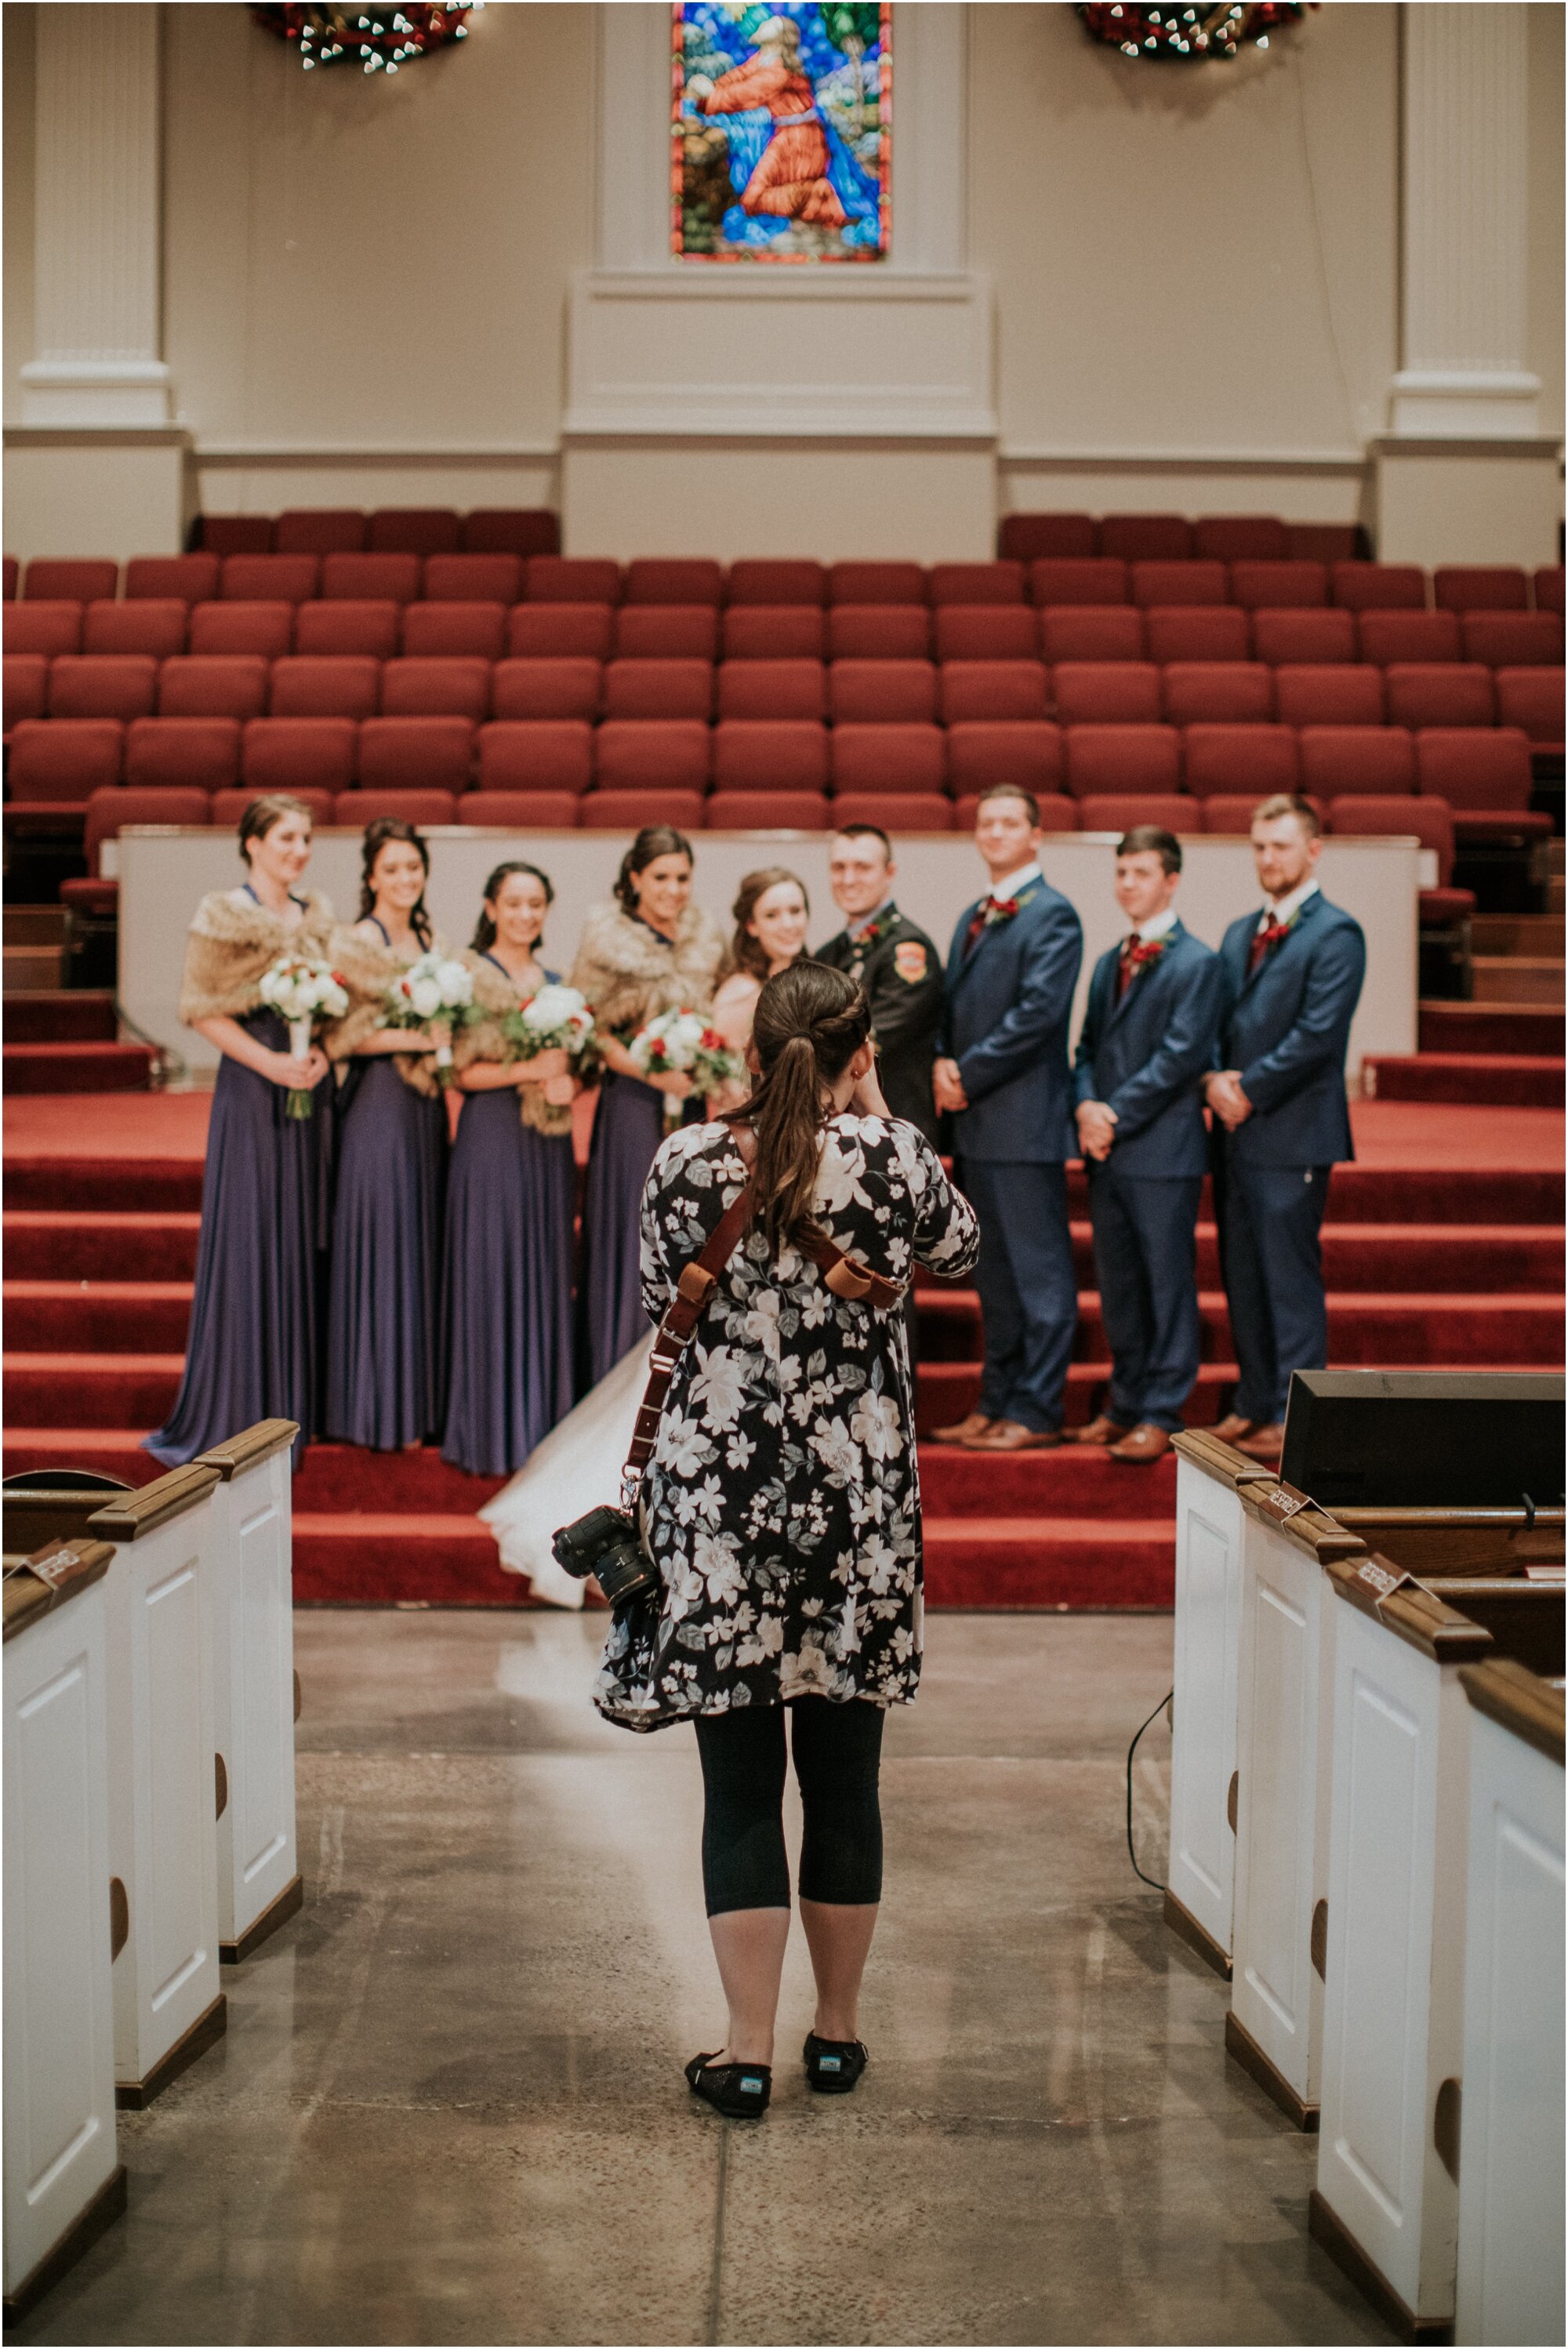   I ended my wedding season with Mikaela and Mason’s wedding in Maryville! They got married at their local church and then had a crazy reception at the Capitol Theatre. A little out of my comfort zone, but definitely a fun and memorable day! A great 